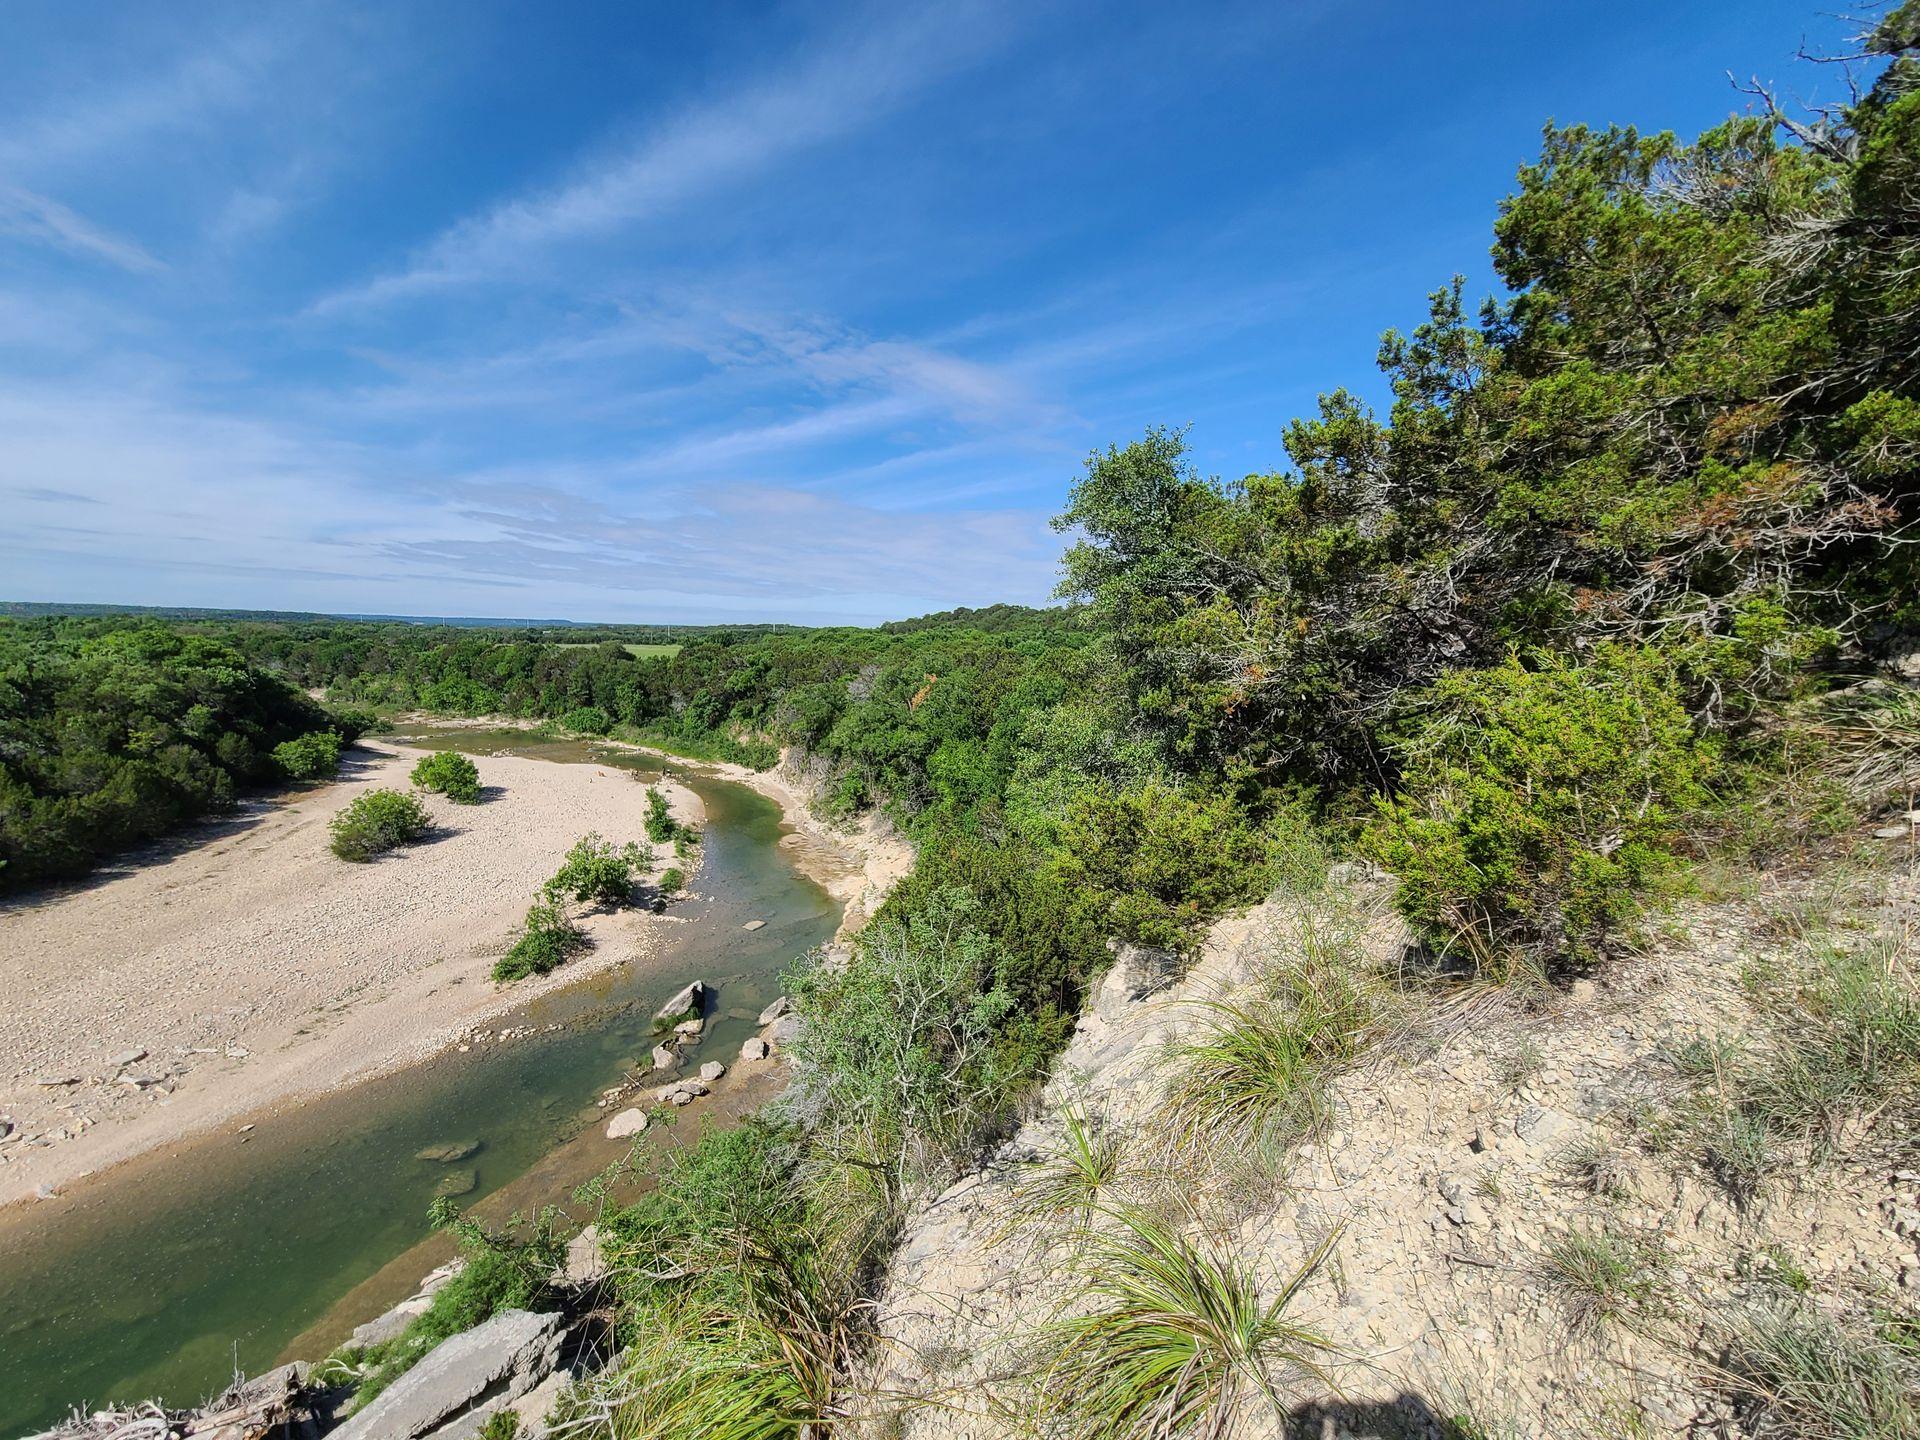 An overlook of the Paluxy River in Dinosaur Valley State Park.